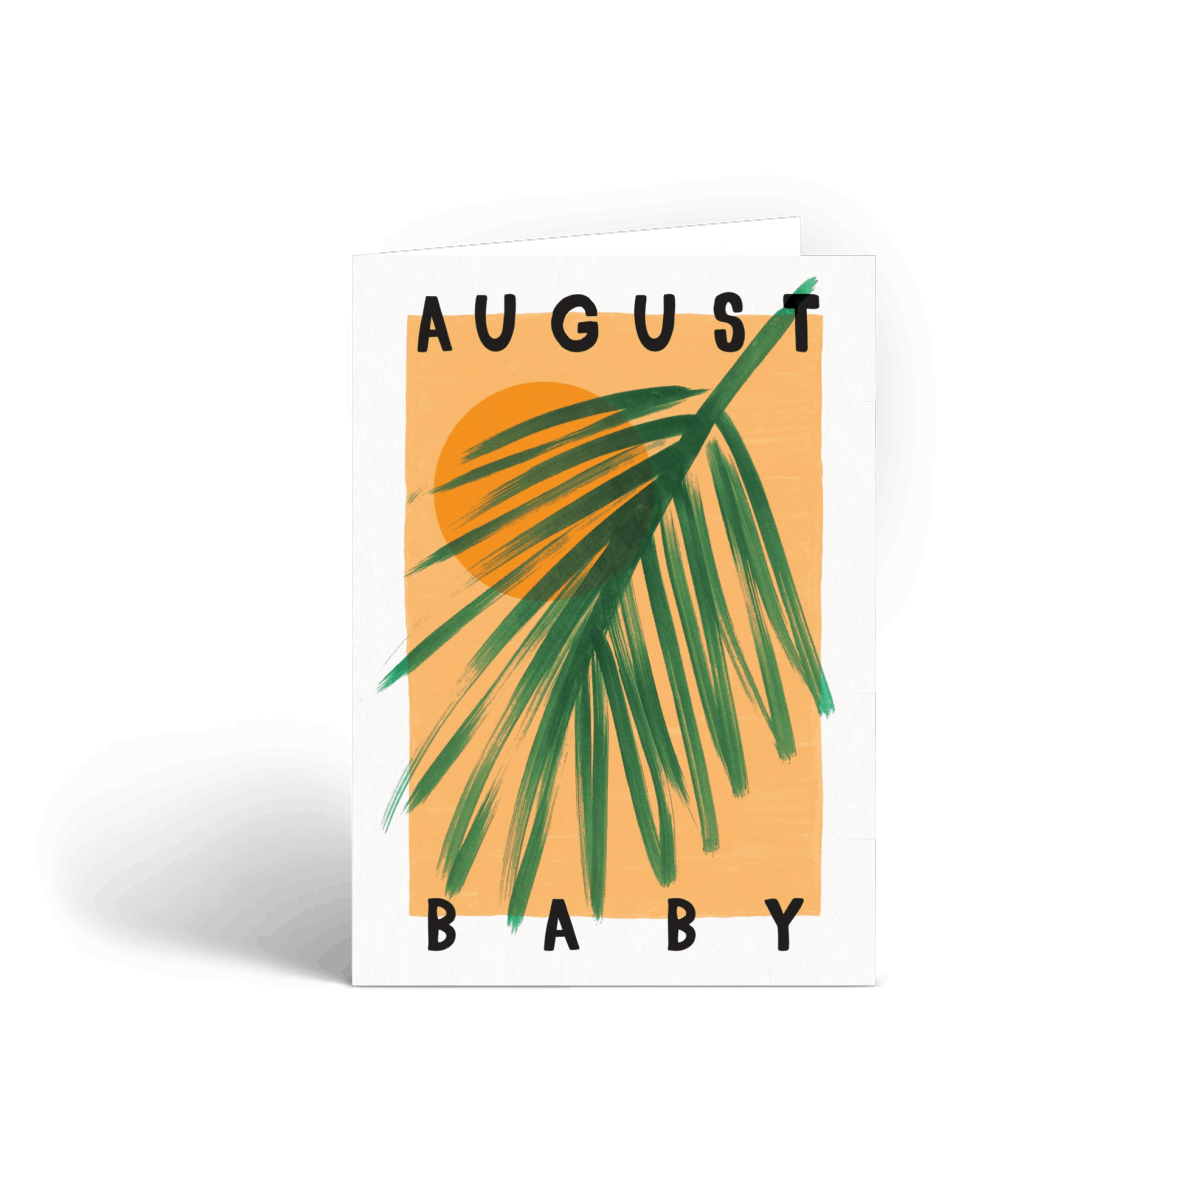 August Baby